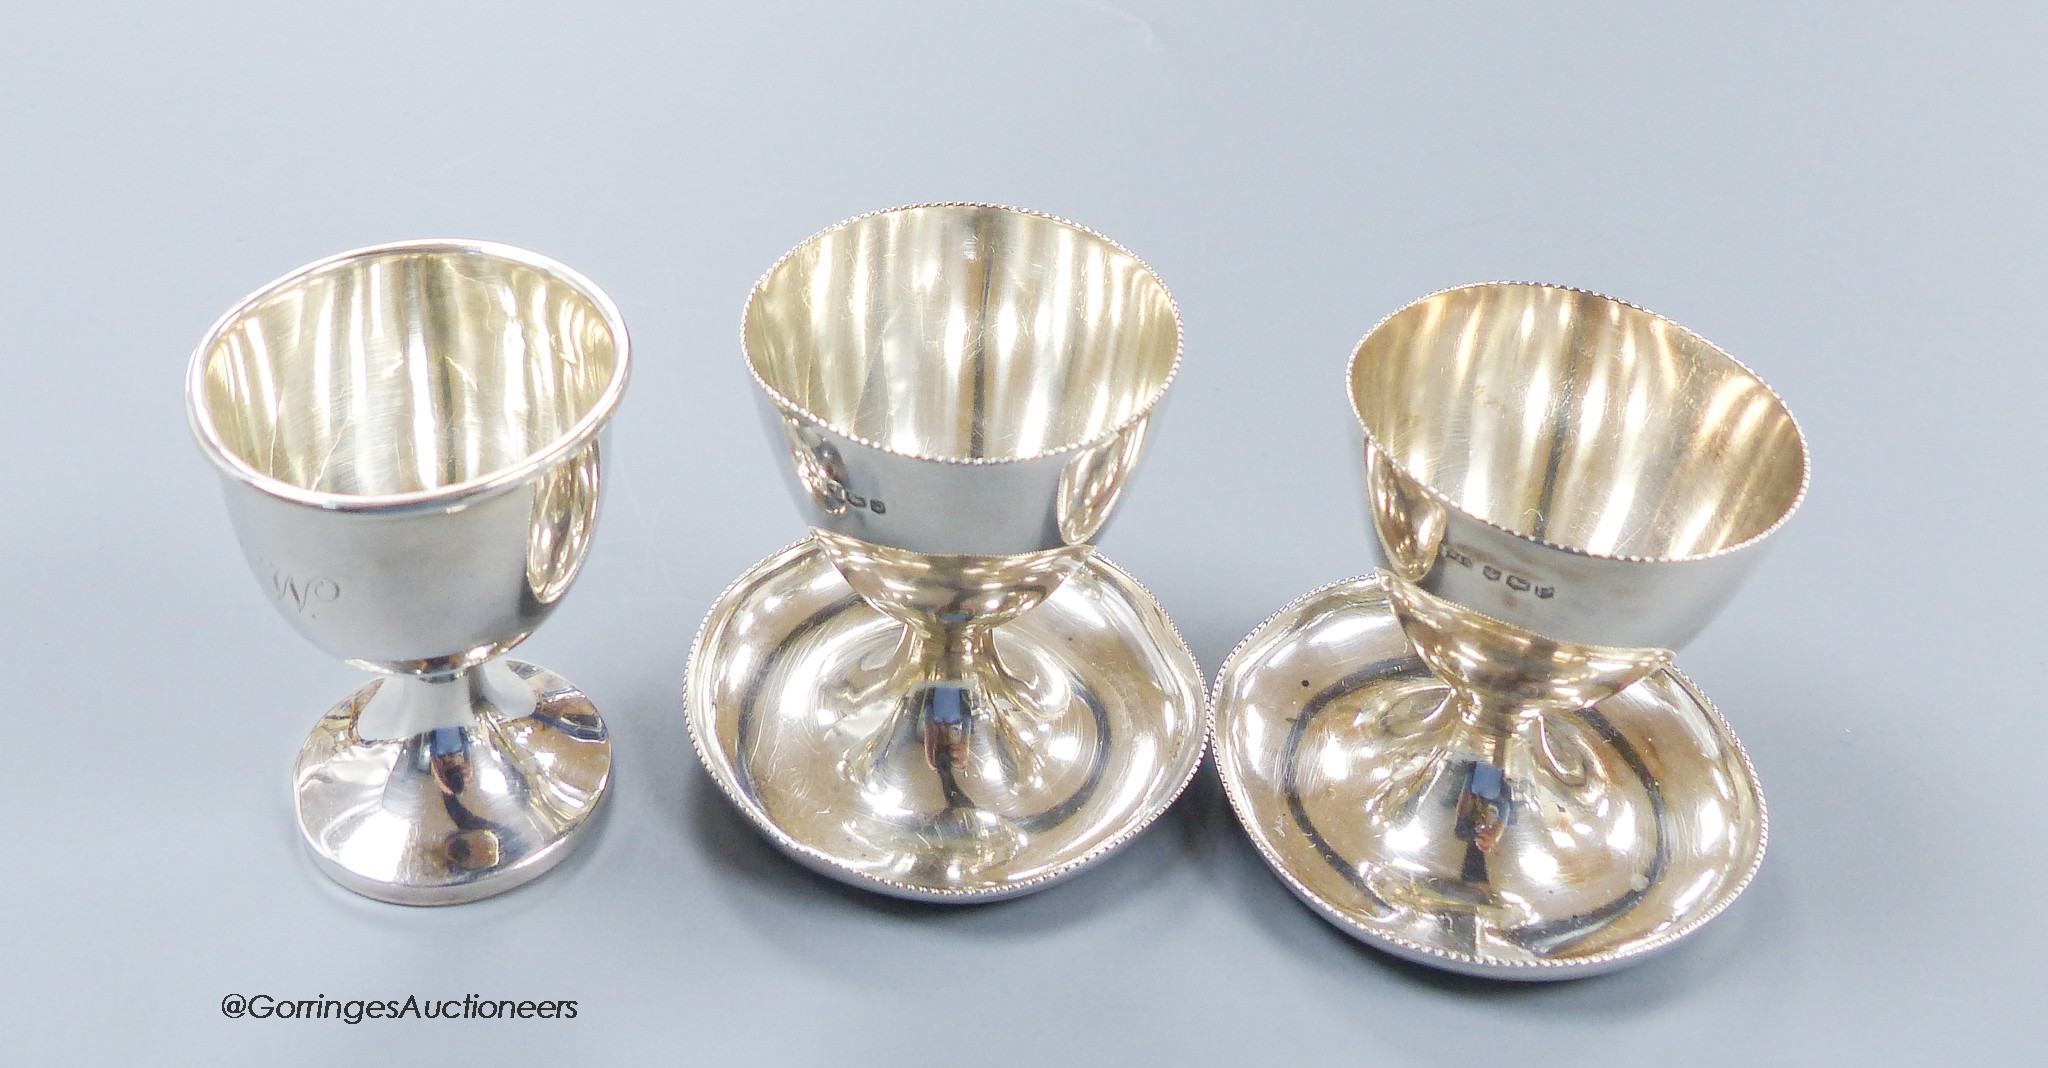 A pair of 1950's silver egg cups, Walker & Hall, Sheffield, 1957/8, 55mm and one other silver egg cup, 131 grams.